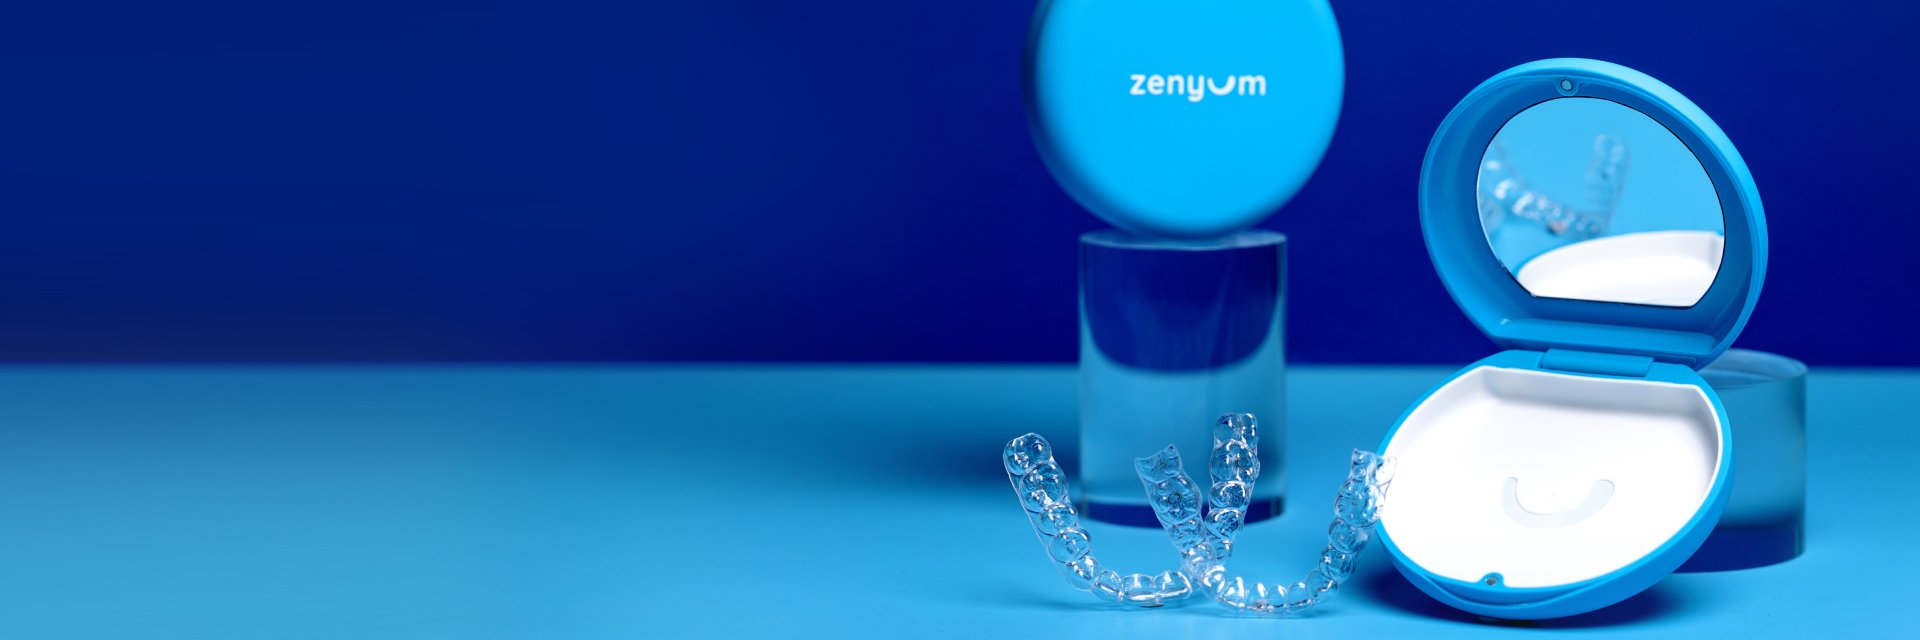 Zenyum clear aligners with blue casings